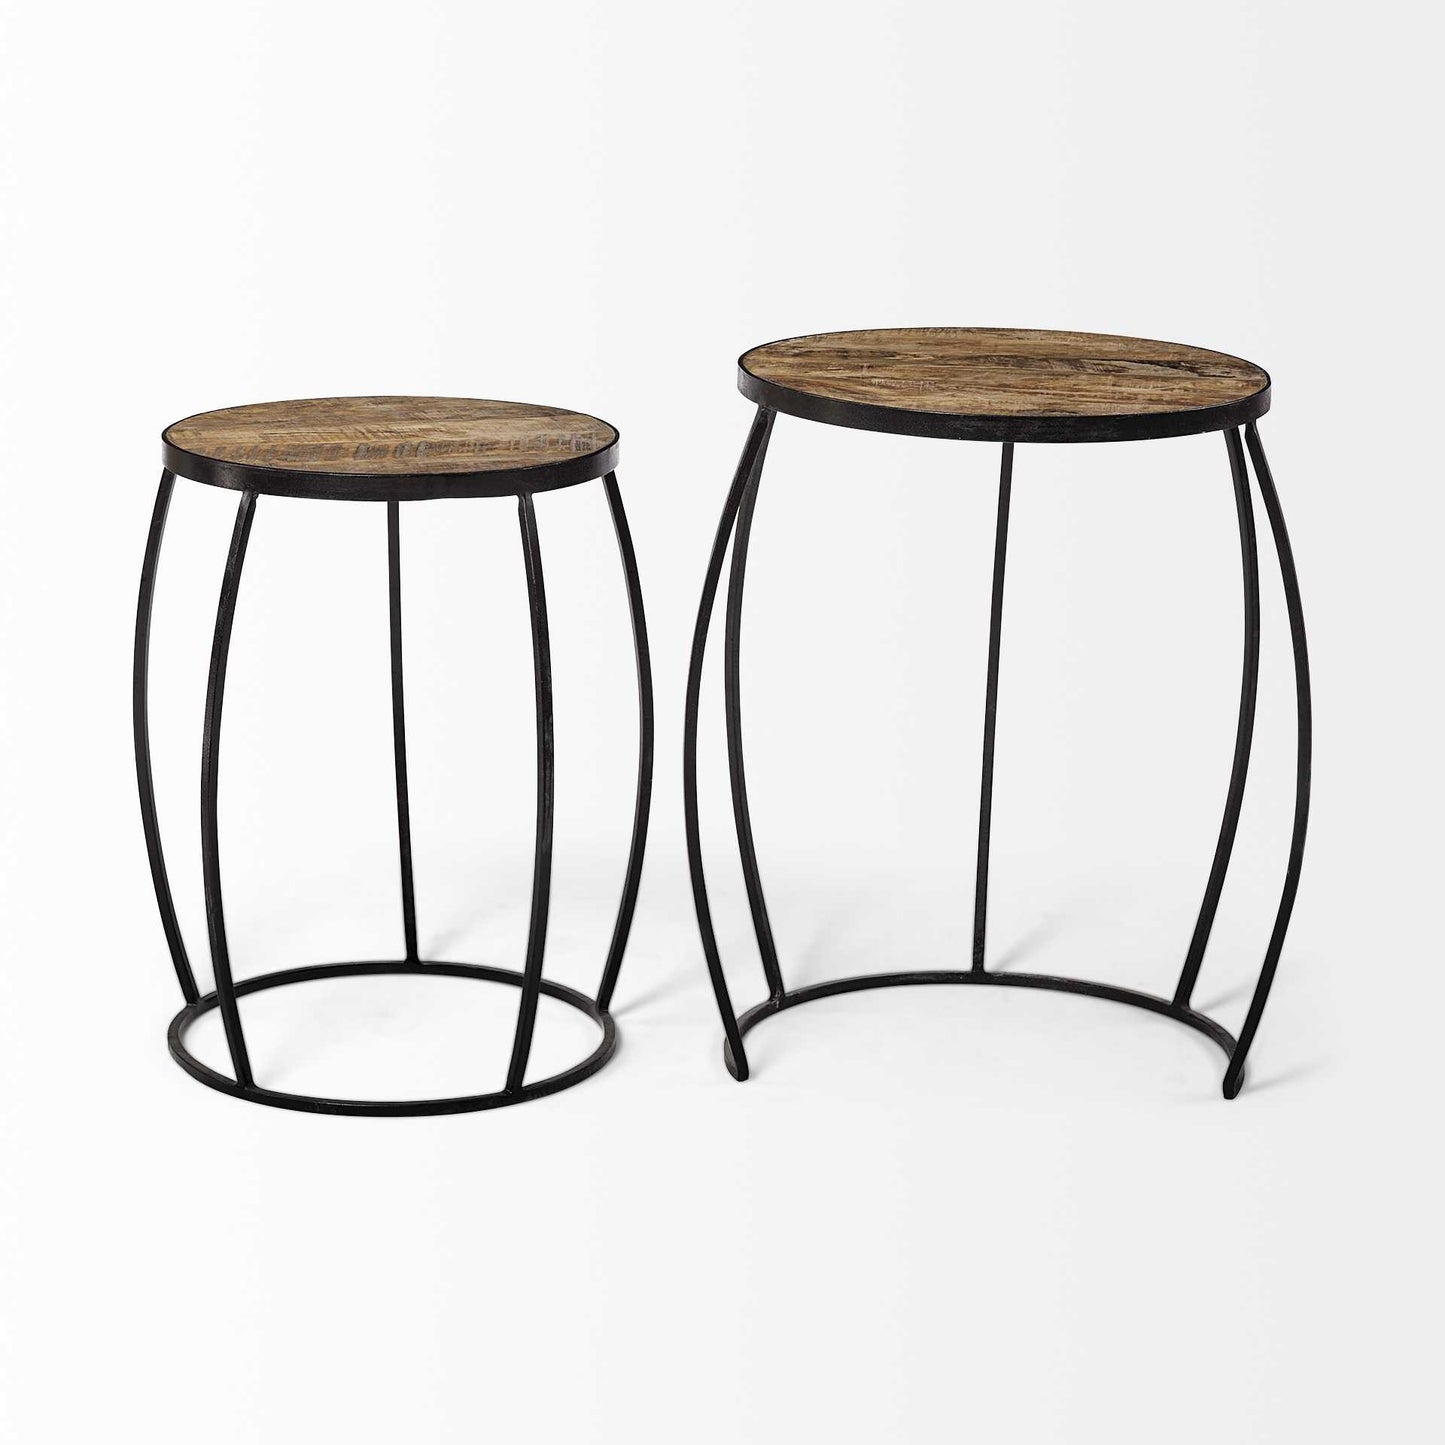 Set of 2 Brown Wooden Round Top Accent Tables with Black Metal Frame Nesting By Homeroots